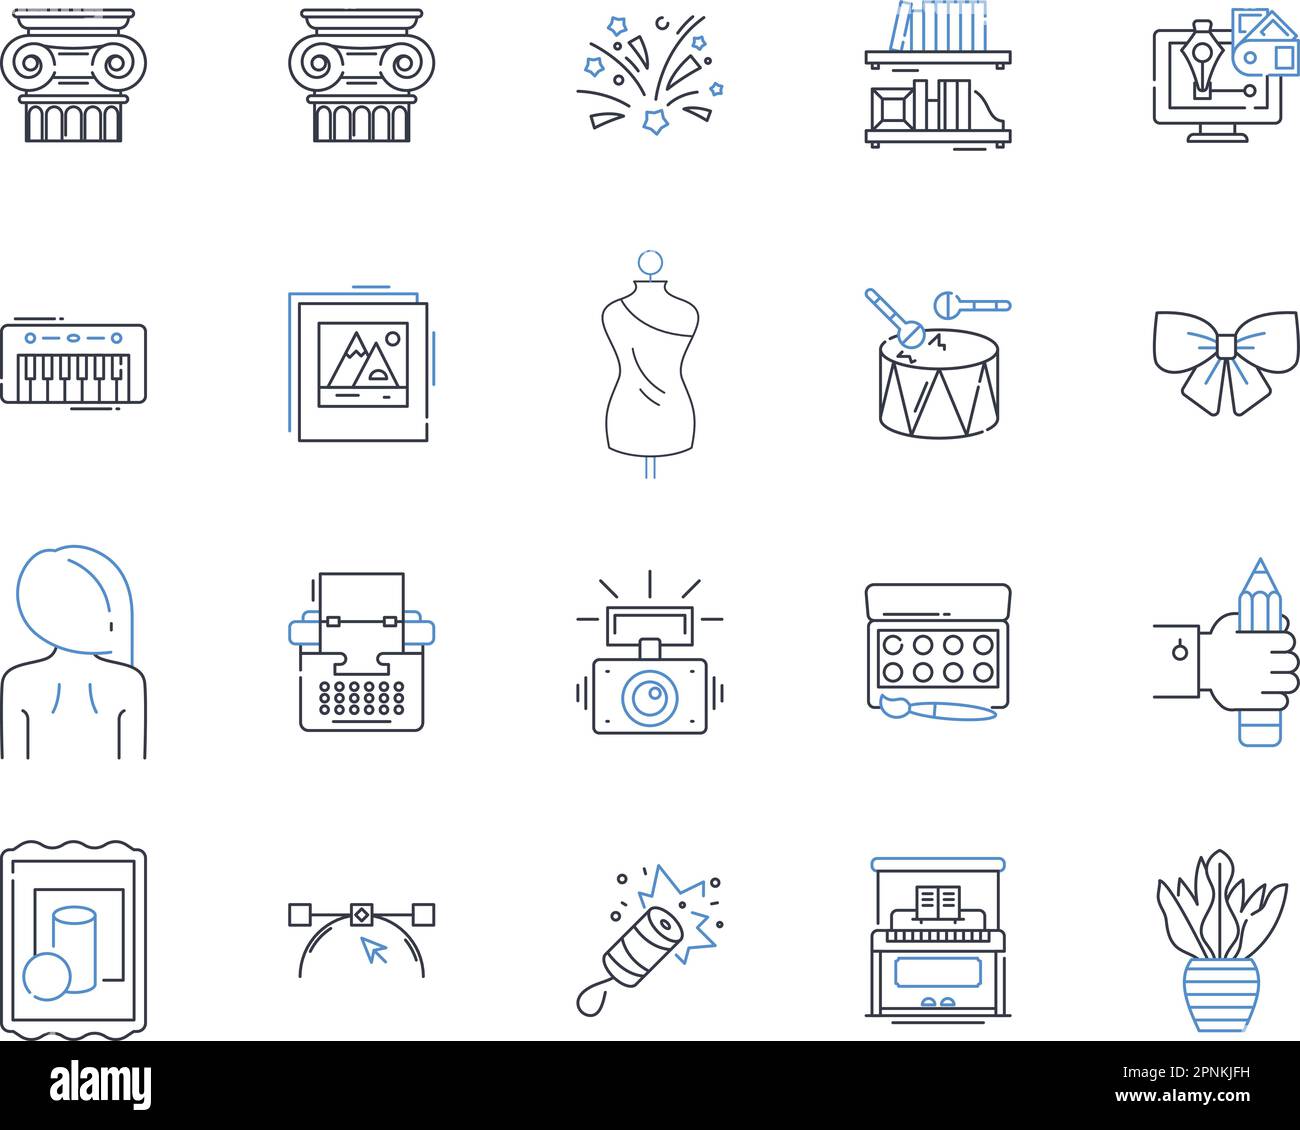 Prototyping methodology line icons collection. Iteration, Prototype ...